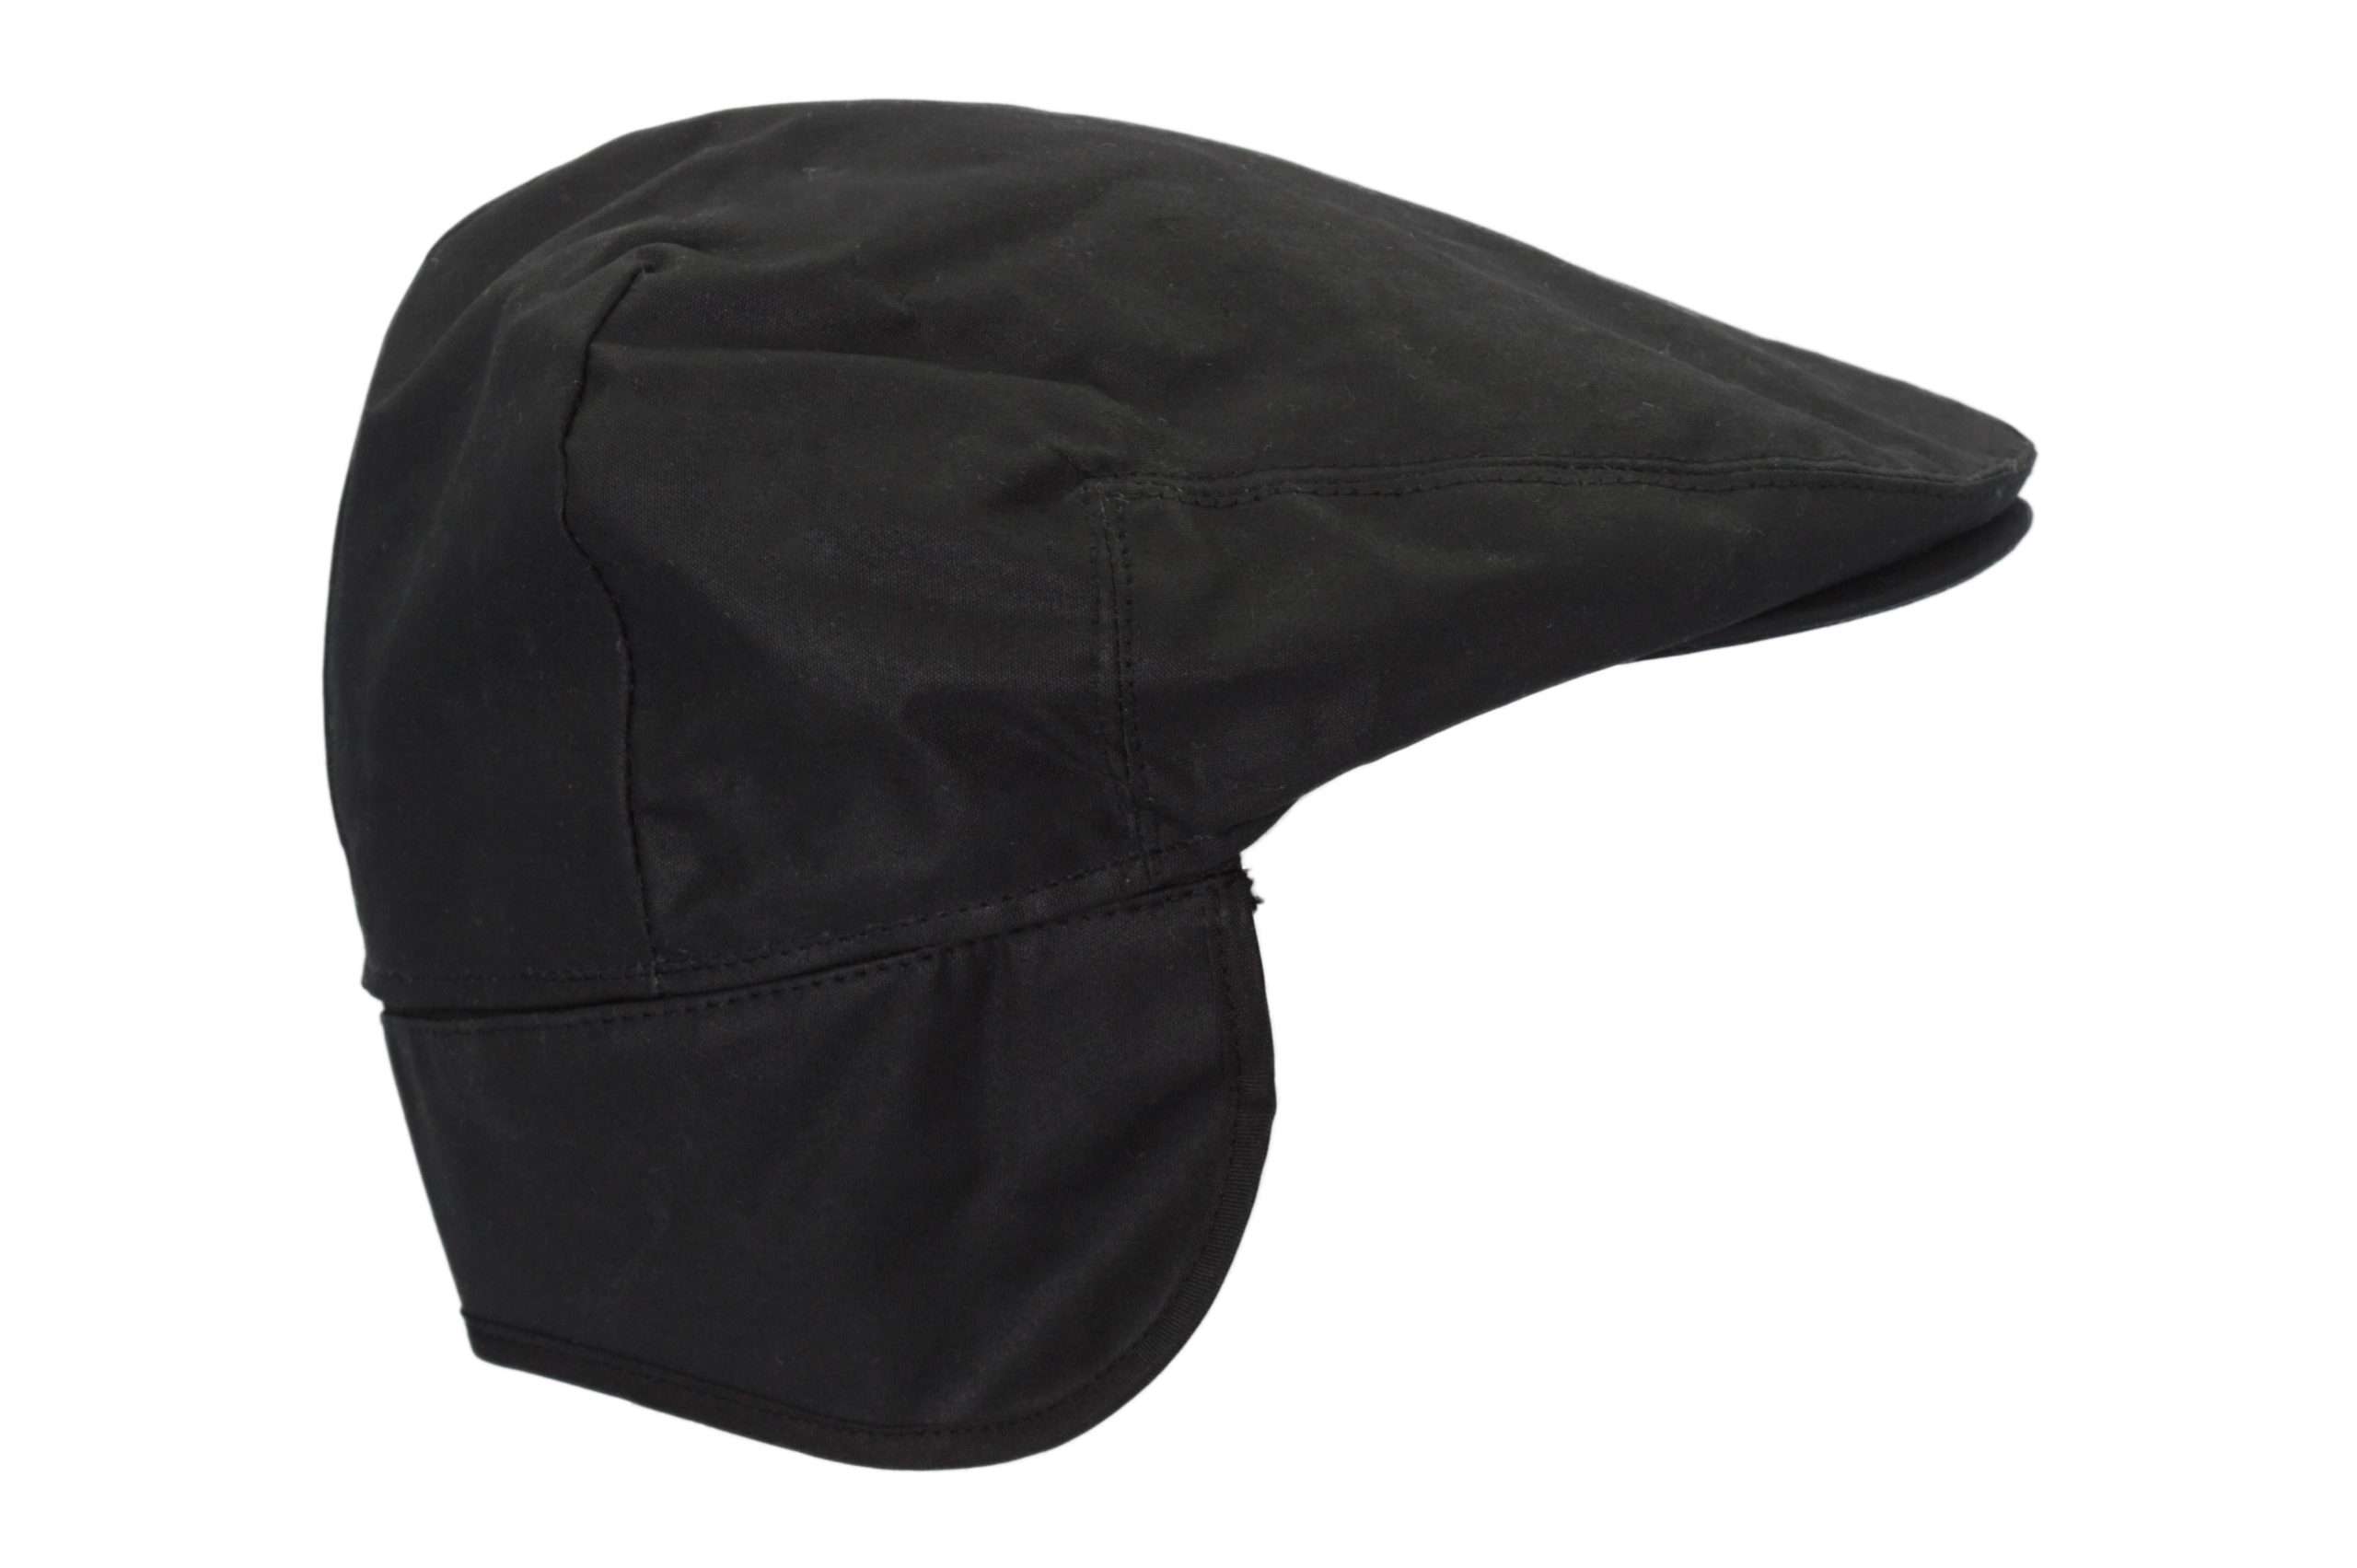 wax trapper black3 scaled 1 Inner Lining is 100% Black Twill lining, with an inner trim band for extra comfort. Outer jacket (shell) is made from 100% Waxed Antique cotton cloth, making this cap of top quality fabric. Foldable Earflaps: internal Fleece ear flaps can be turned down over the ears and neck for added warmth on chilly days